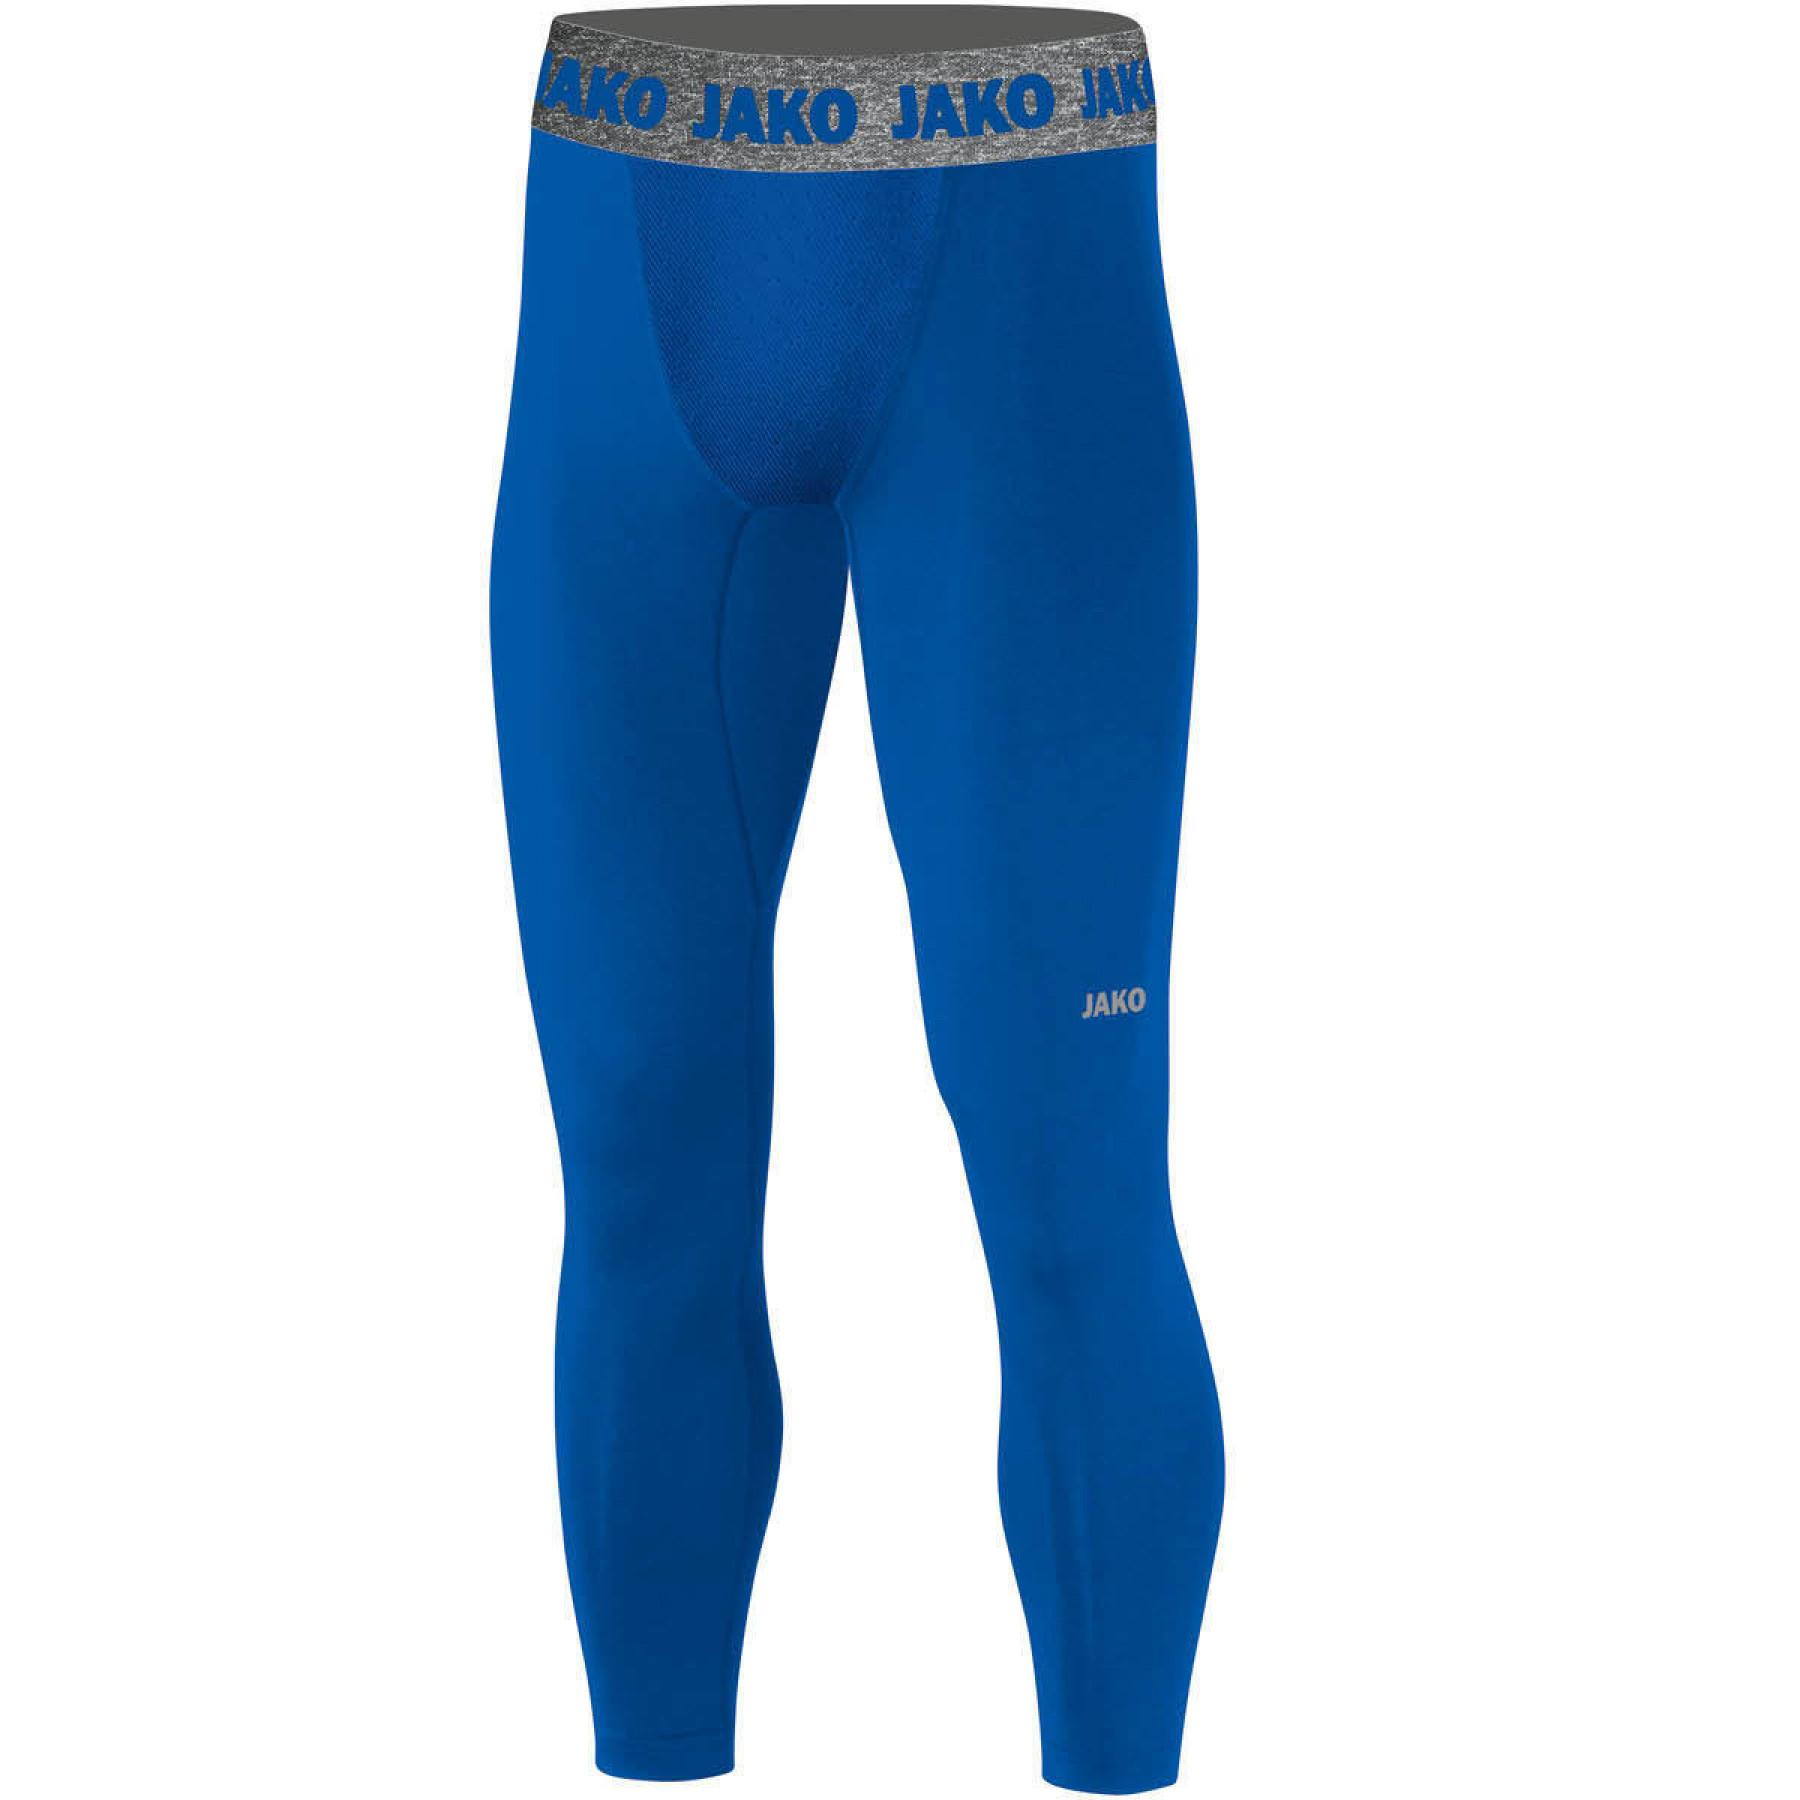 Cuissard Jako long Compression 2.0